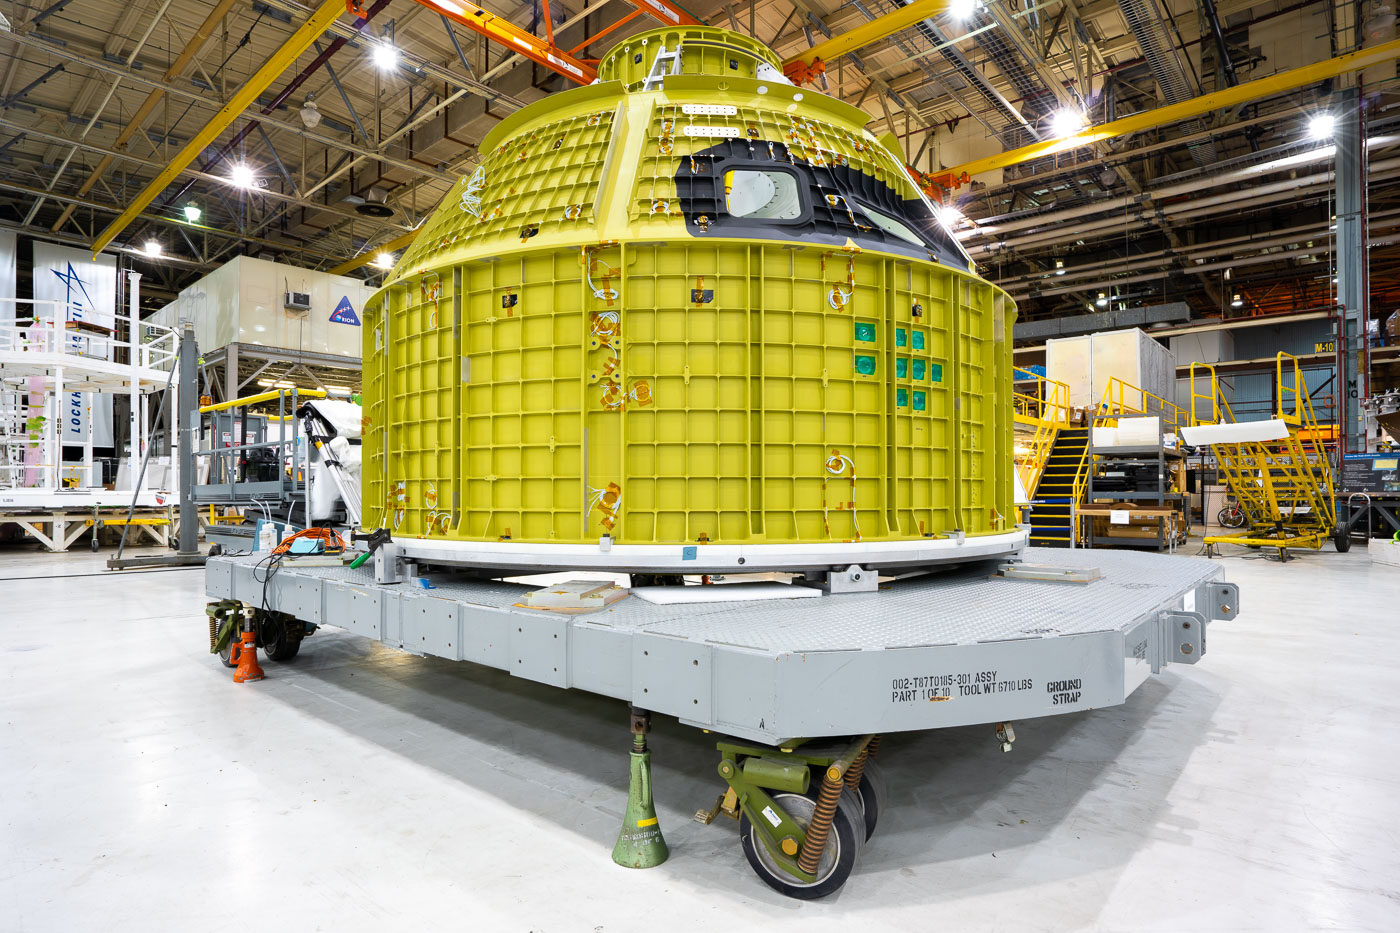 NASA”s Artemis II crew module at NASA’s Michoud Assembly Facility.As of March 2024 the launch date is planned for September 2024. It’ll be the first crewed mission of the Orion Spacecraft and will do a moon flyby. It’ll be the first crew to travel beyond low orbit earth since 1972.